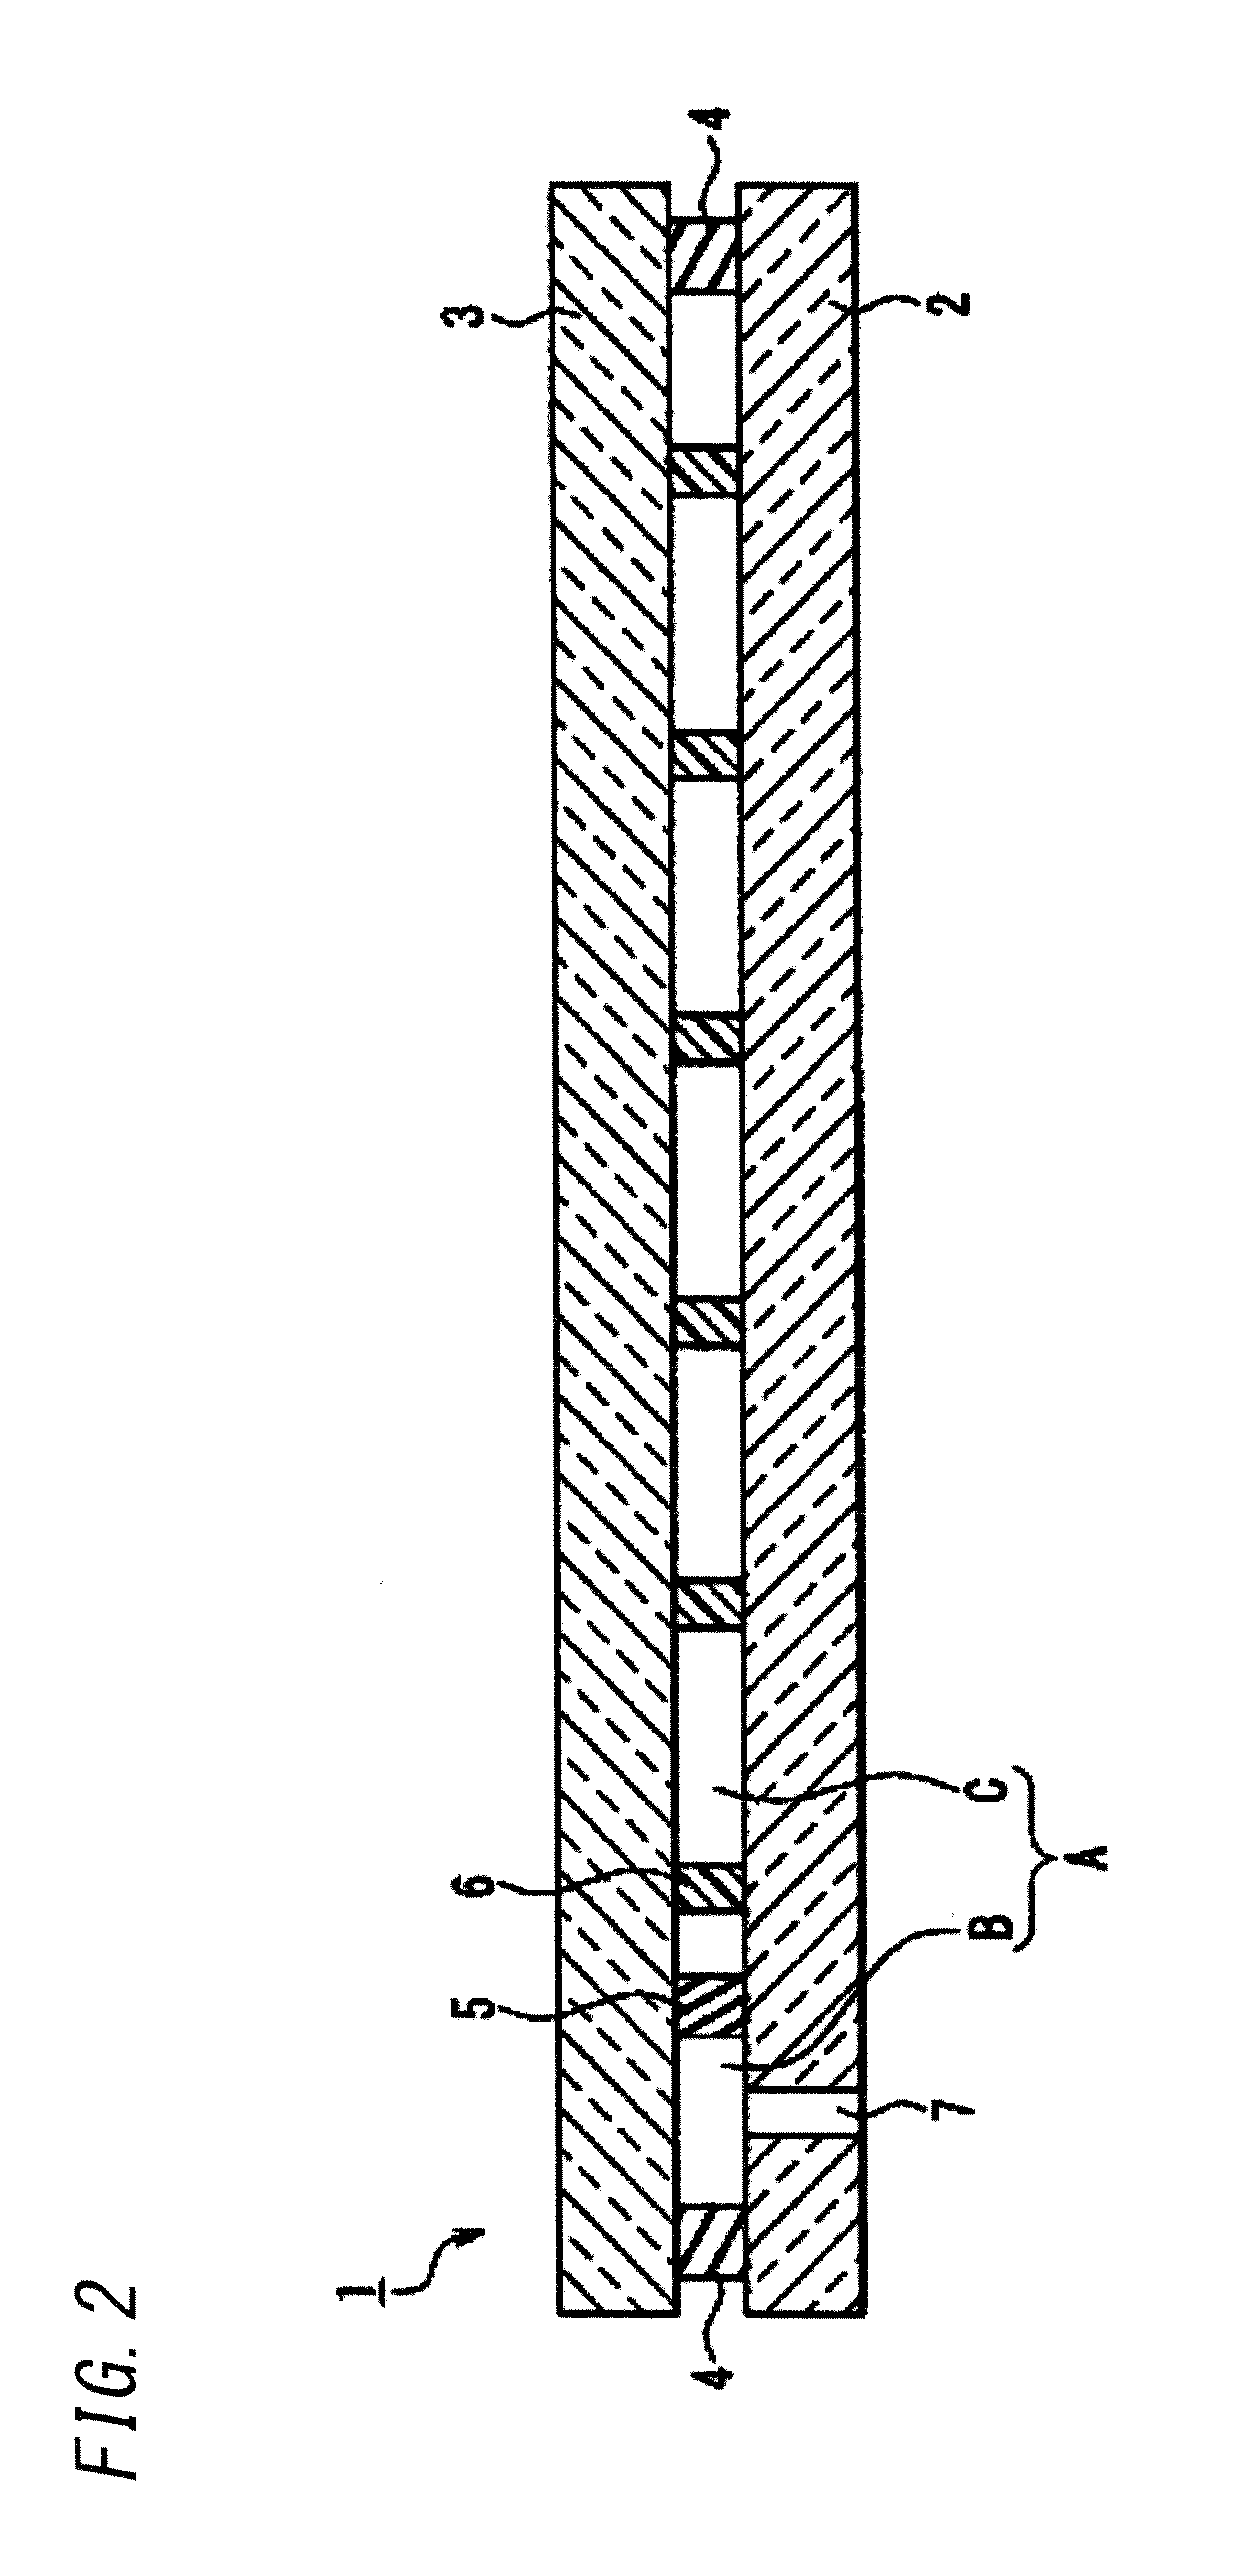 Production method of multiple panes